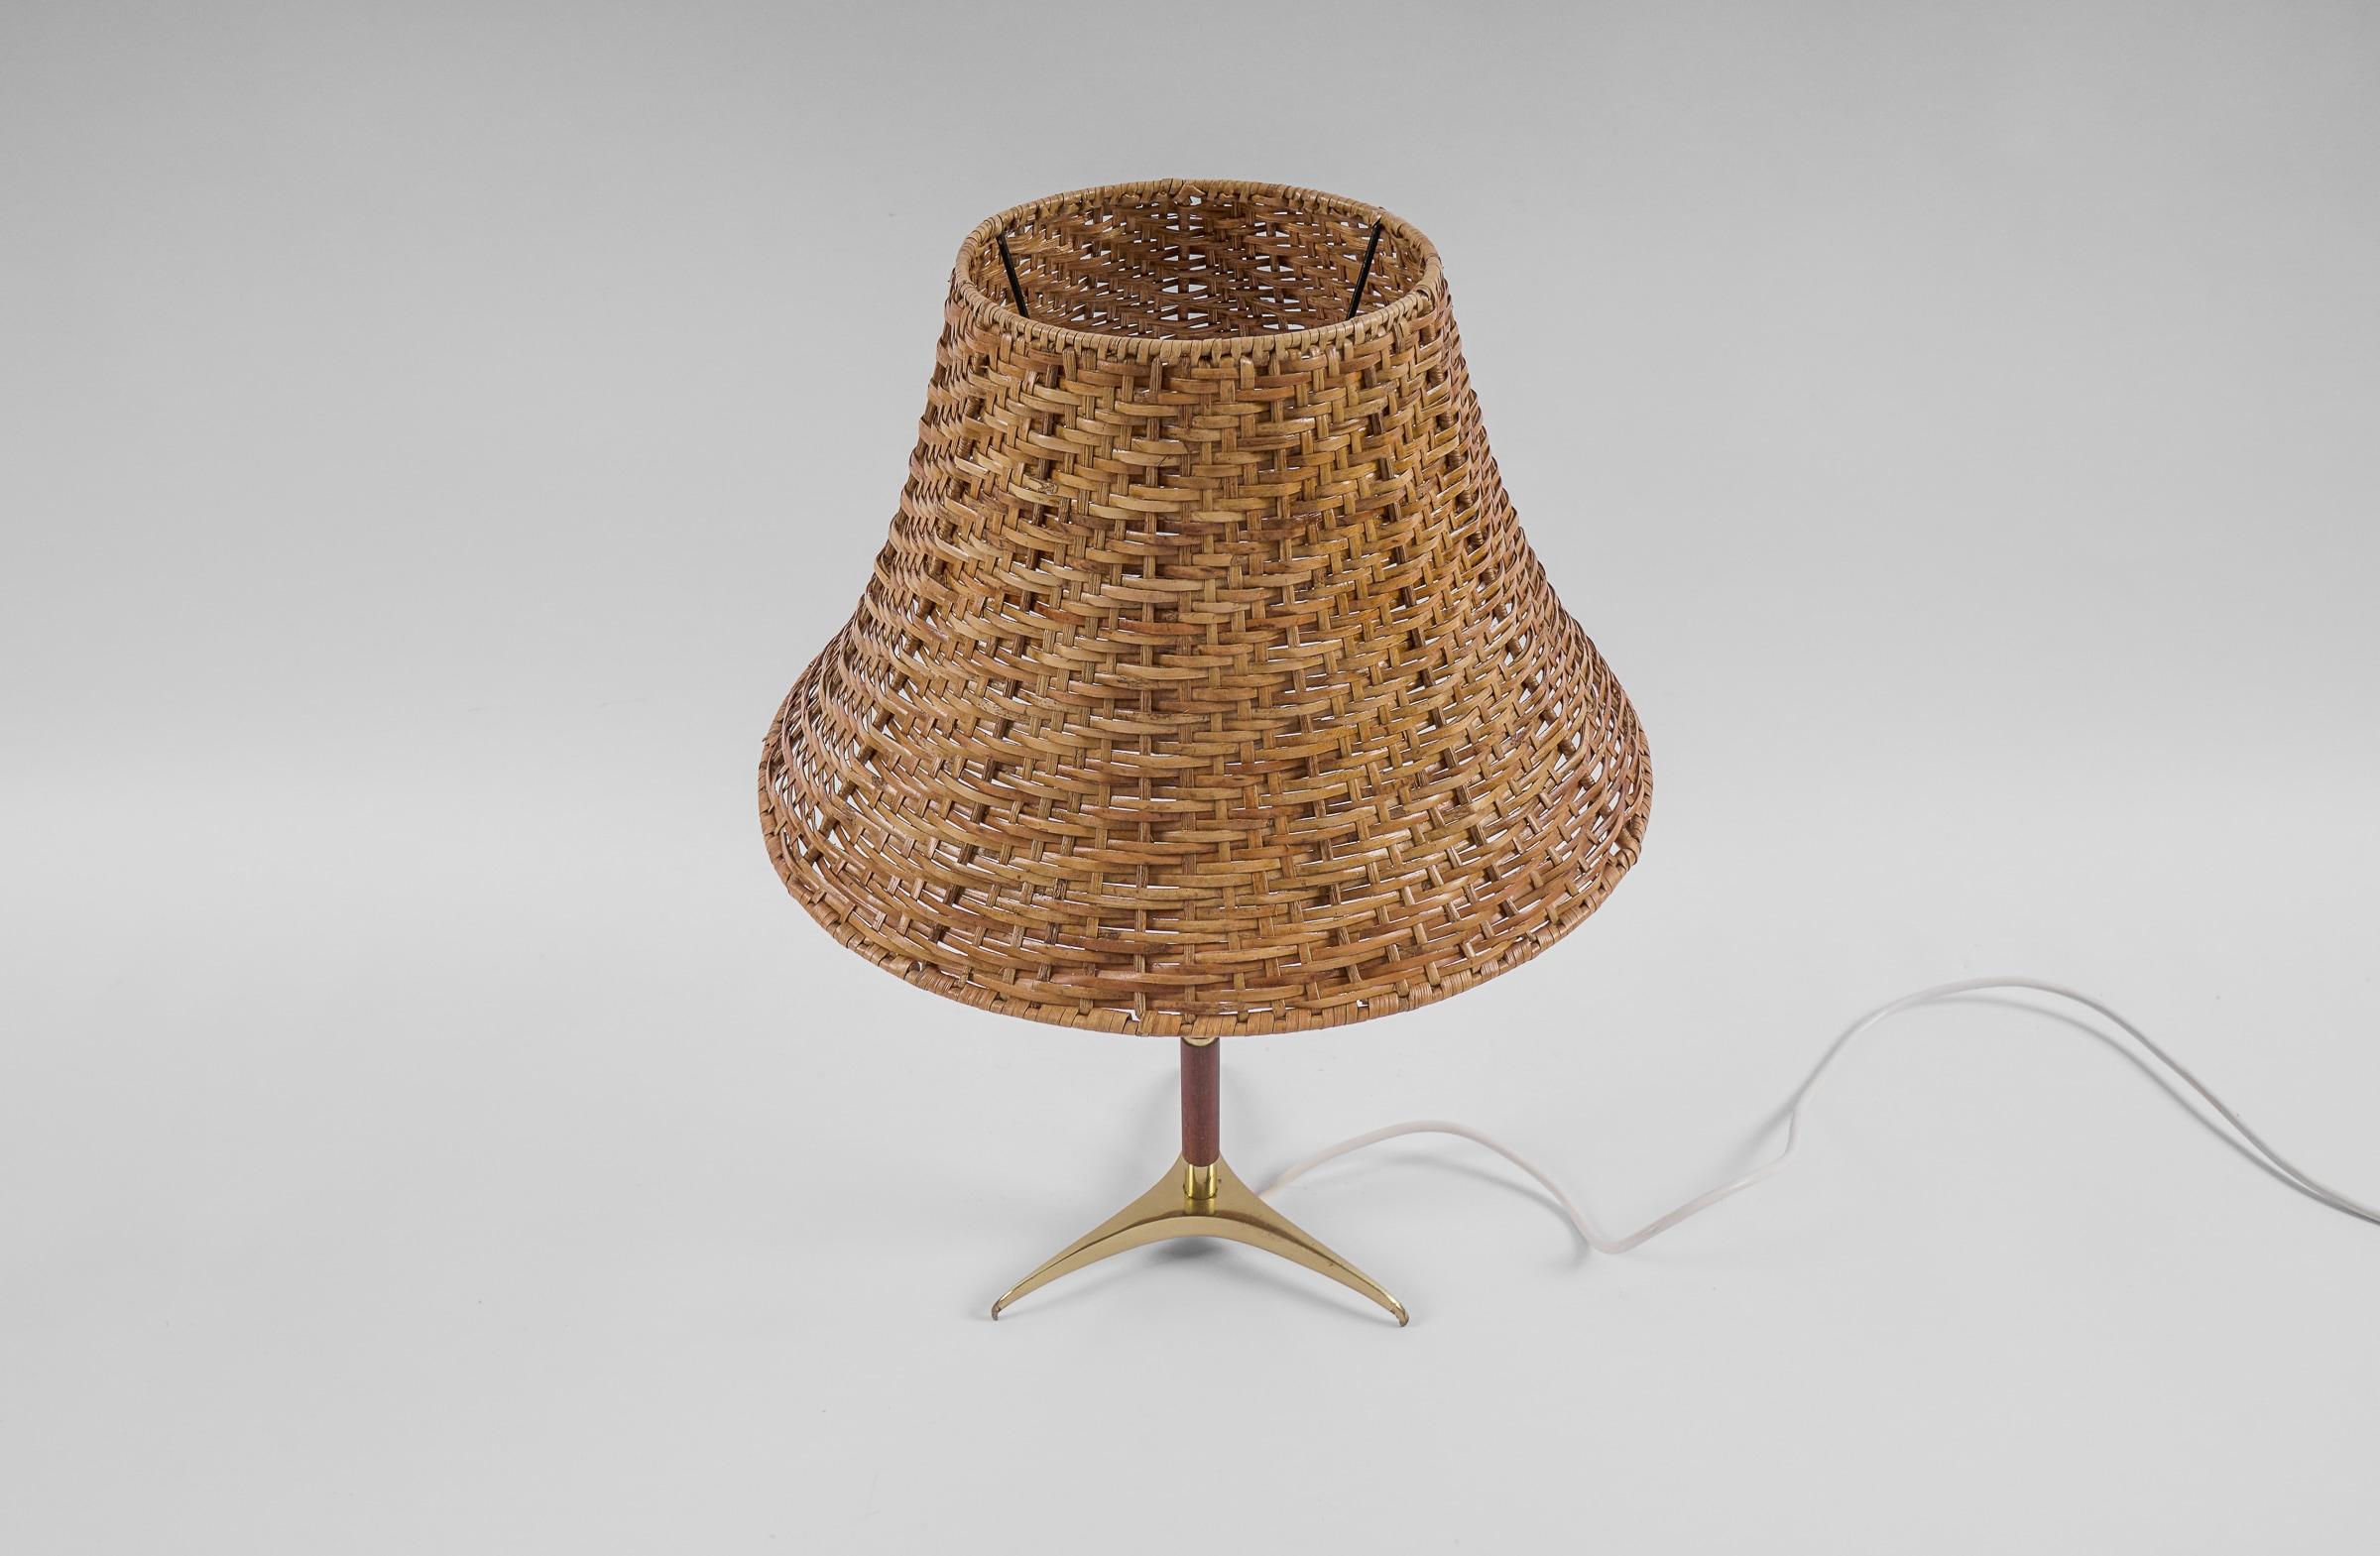 Lovely Mid-Century Modern Table Lamp in Brass, Wicker and Teak, 1950s, Austria For Sale 7